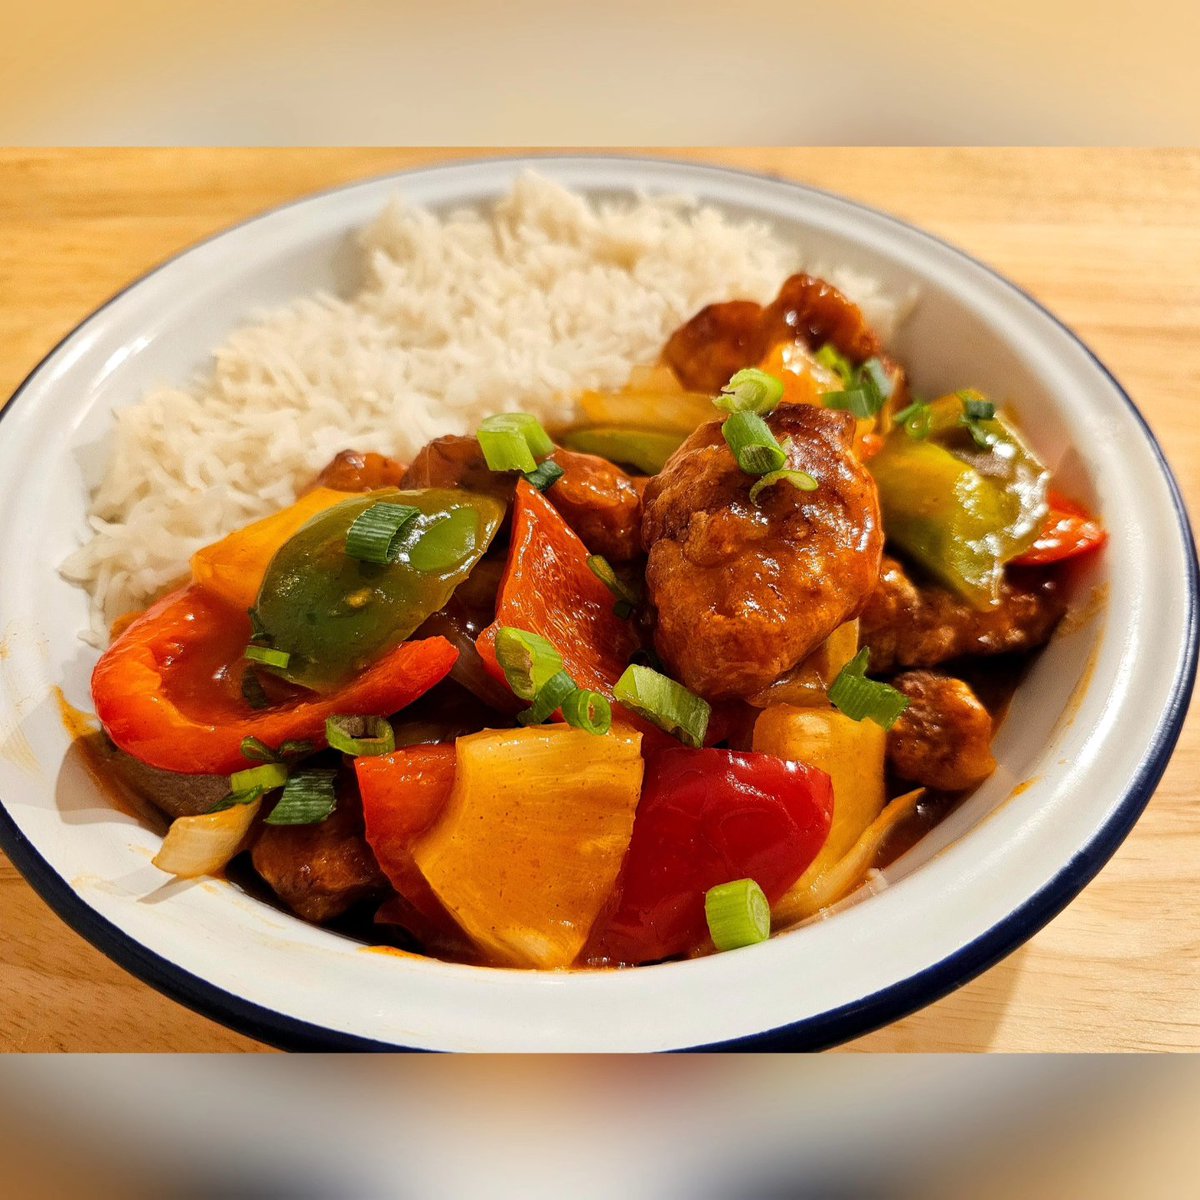 In tribute to the Tung Sing, Cork's historic Chinese restaurant, which closed last weekend, I've recreated the first dish I ever ate there, Sweet and Sour Pork Hong-Kong style. It sparked a love of food that I've never lost. #food #Cork